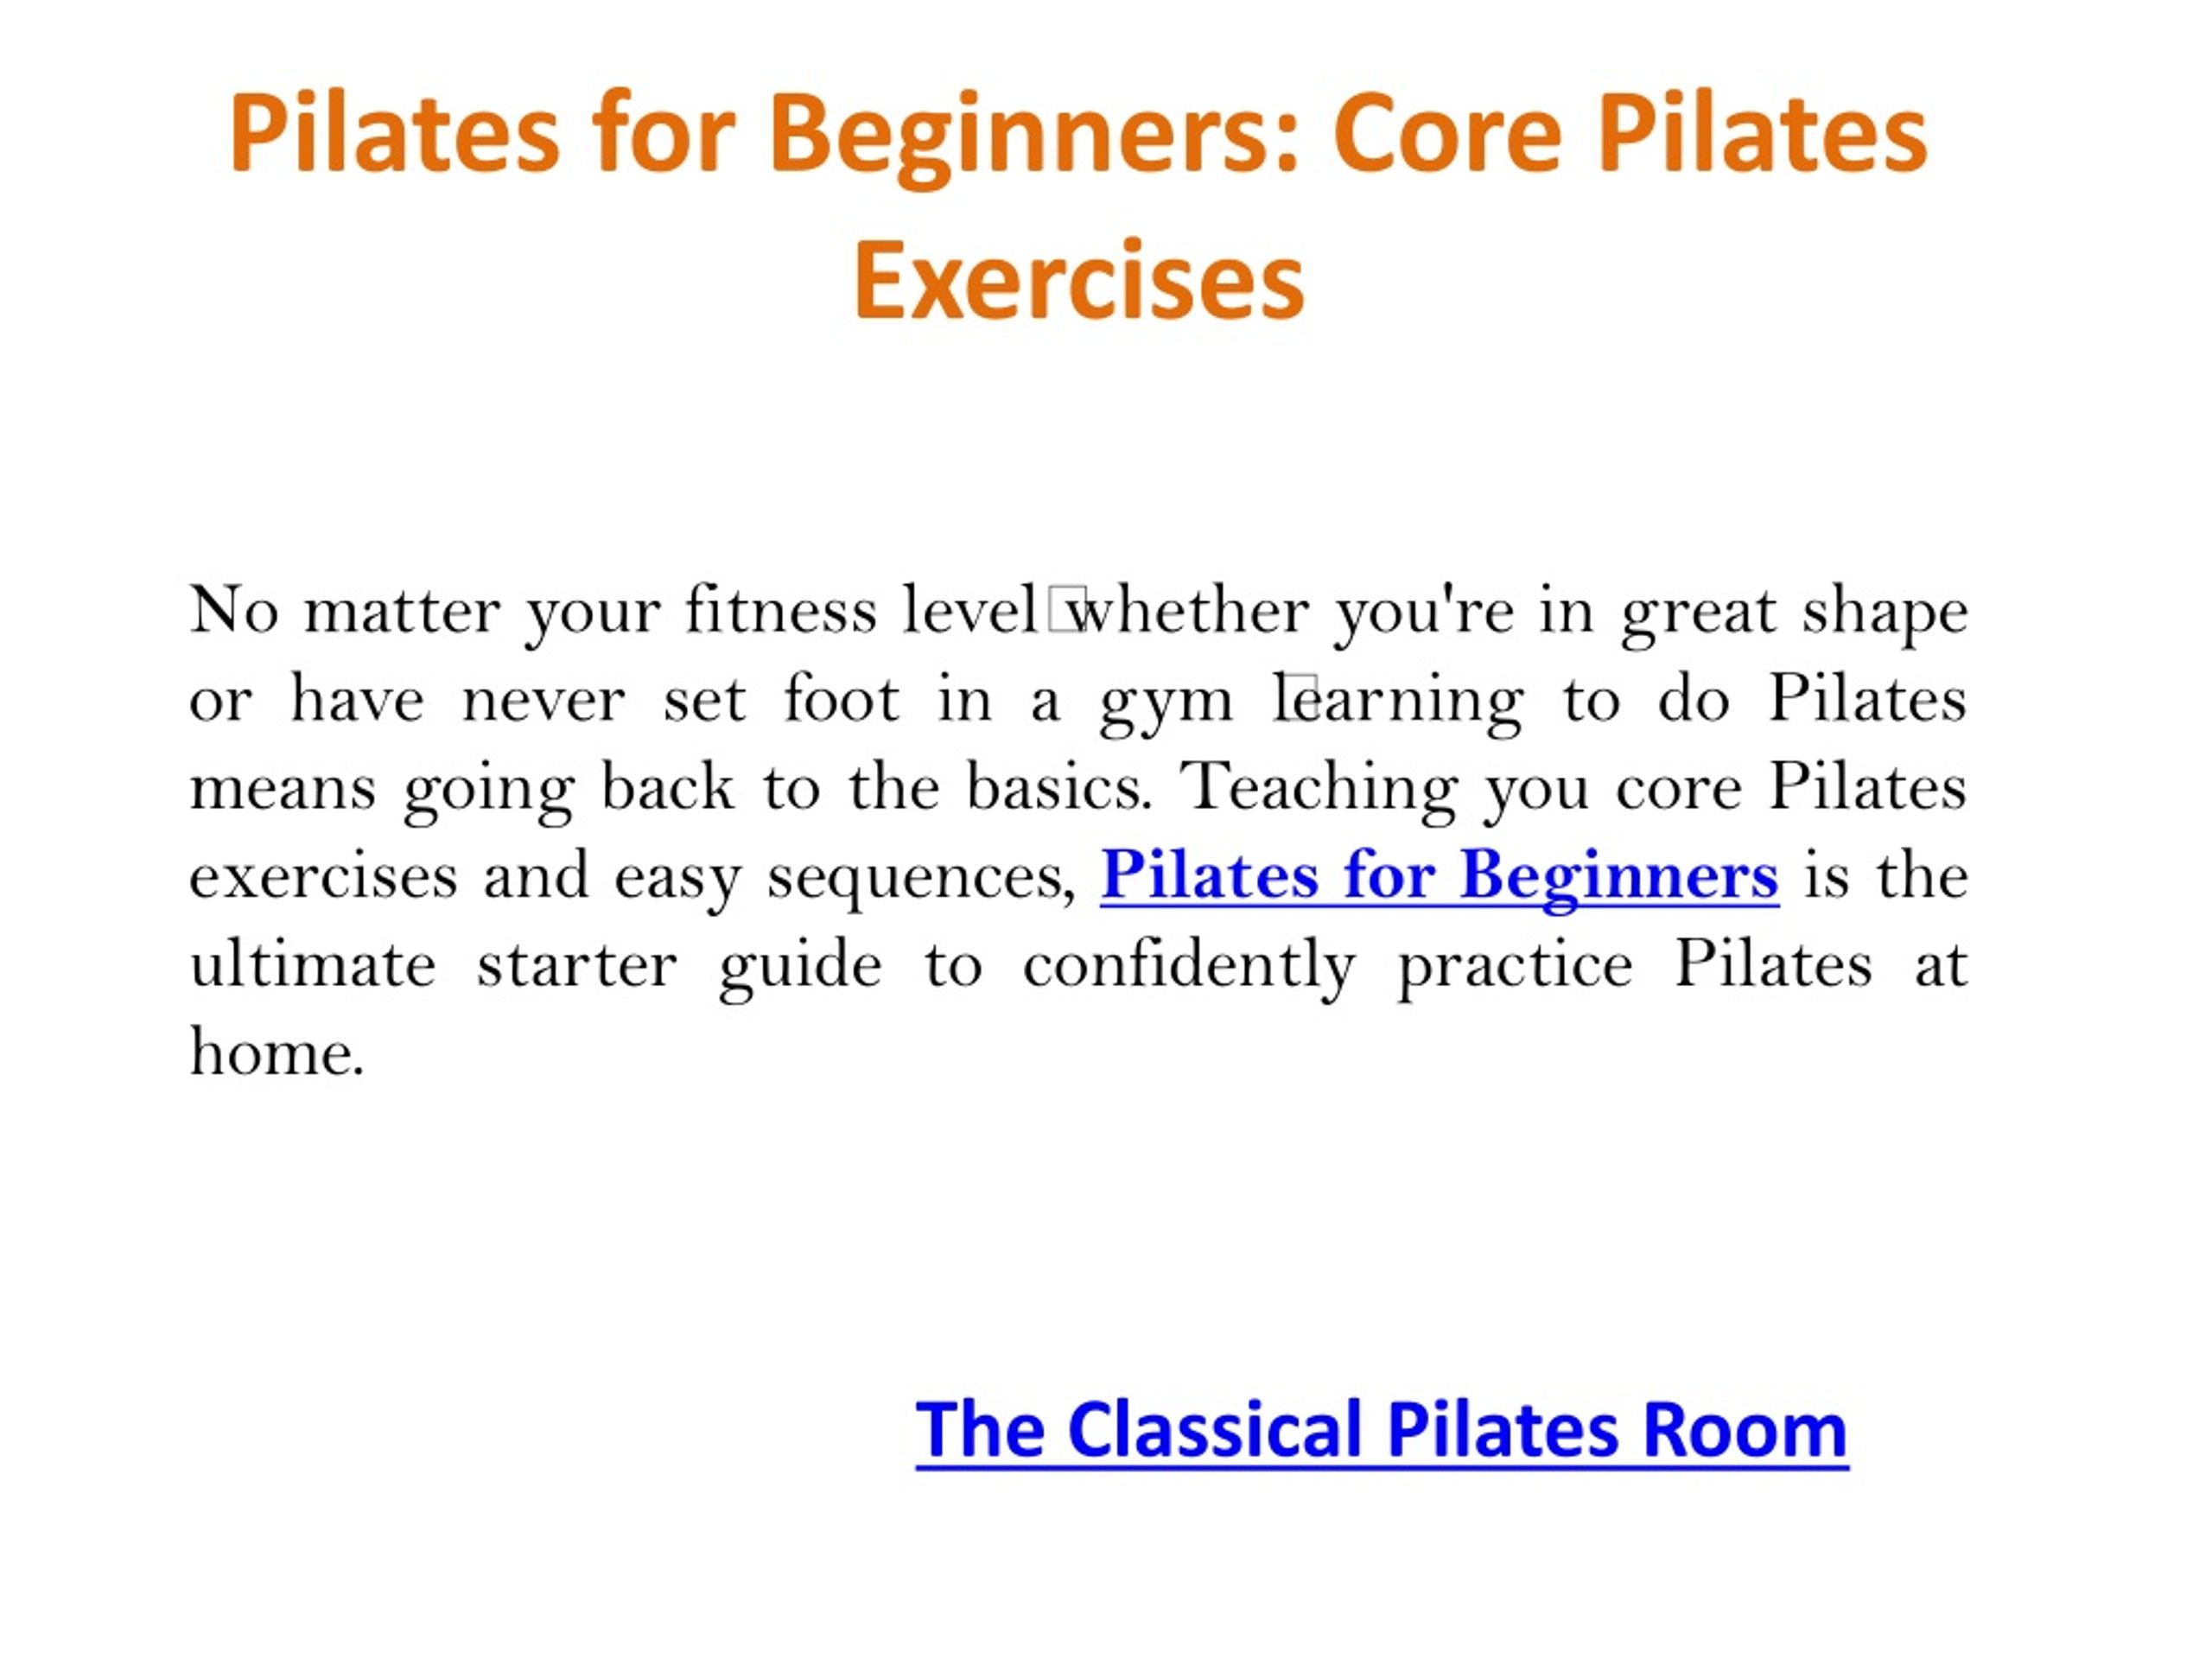 PPT - Pilates Mat Classes - For Improving Your Health & Fitness